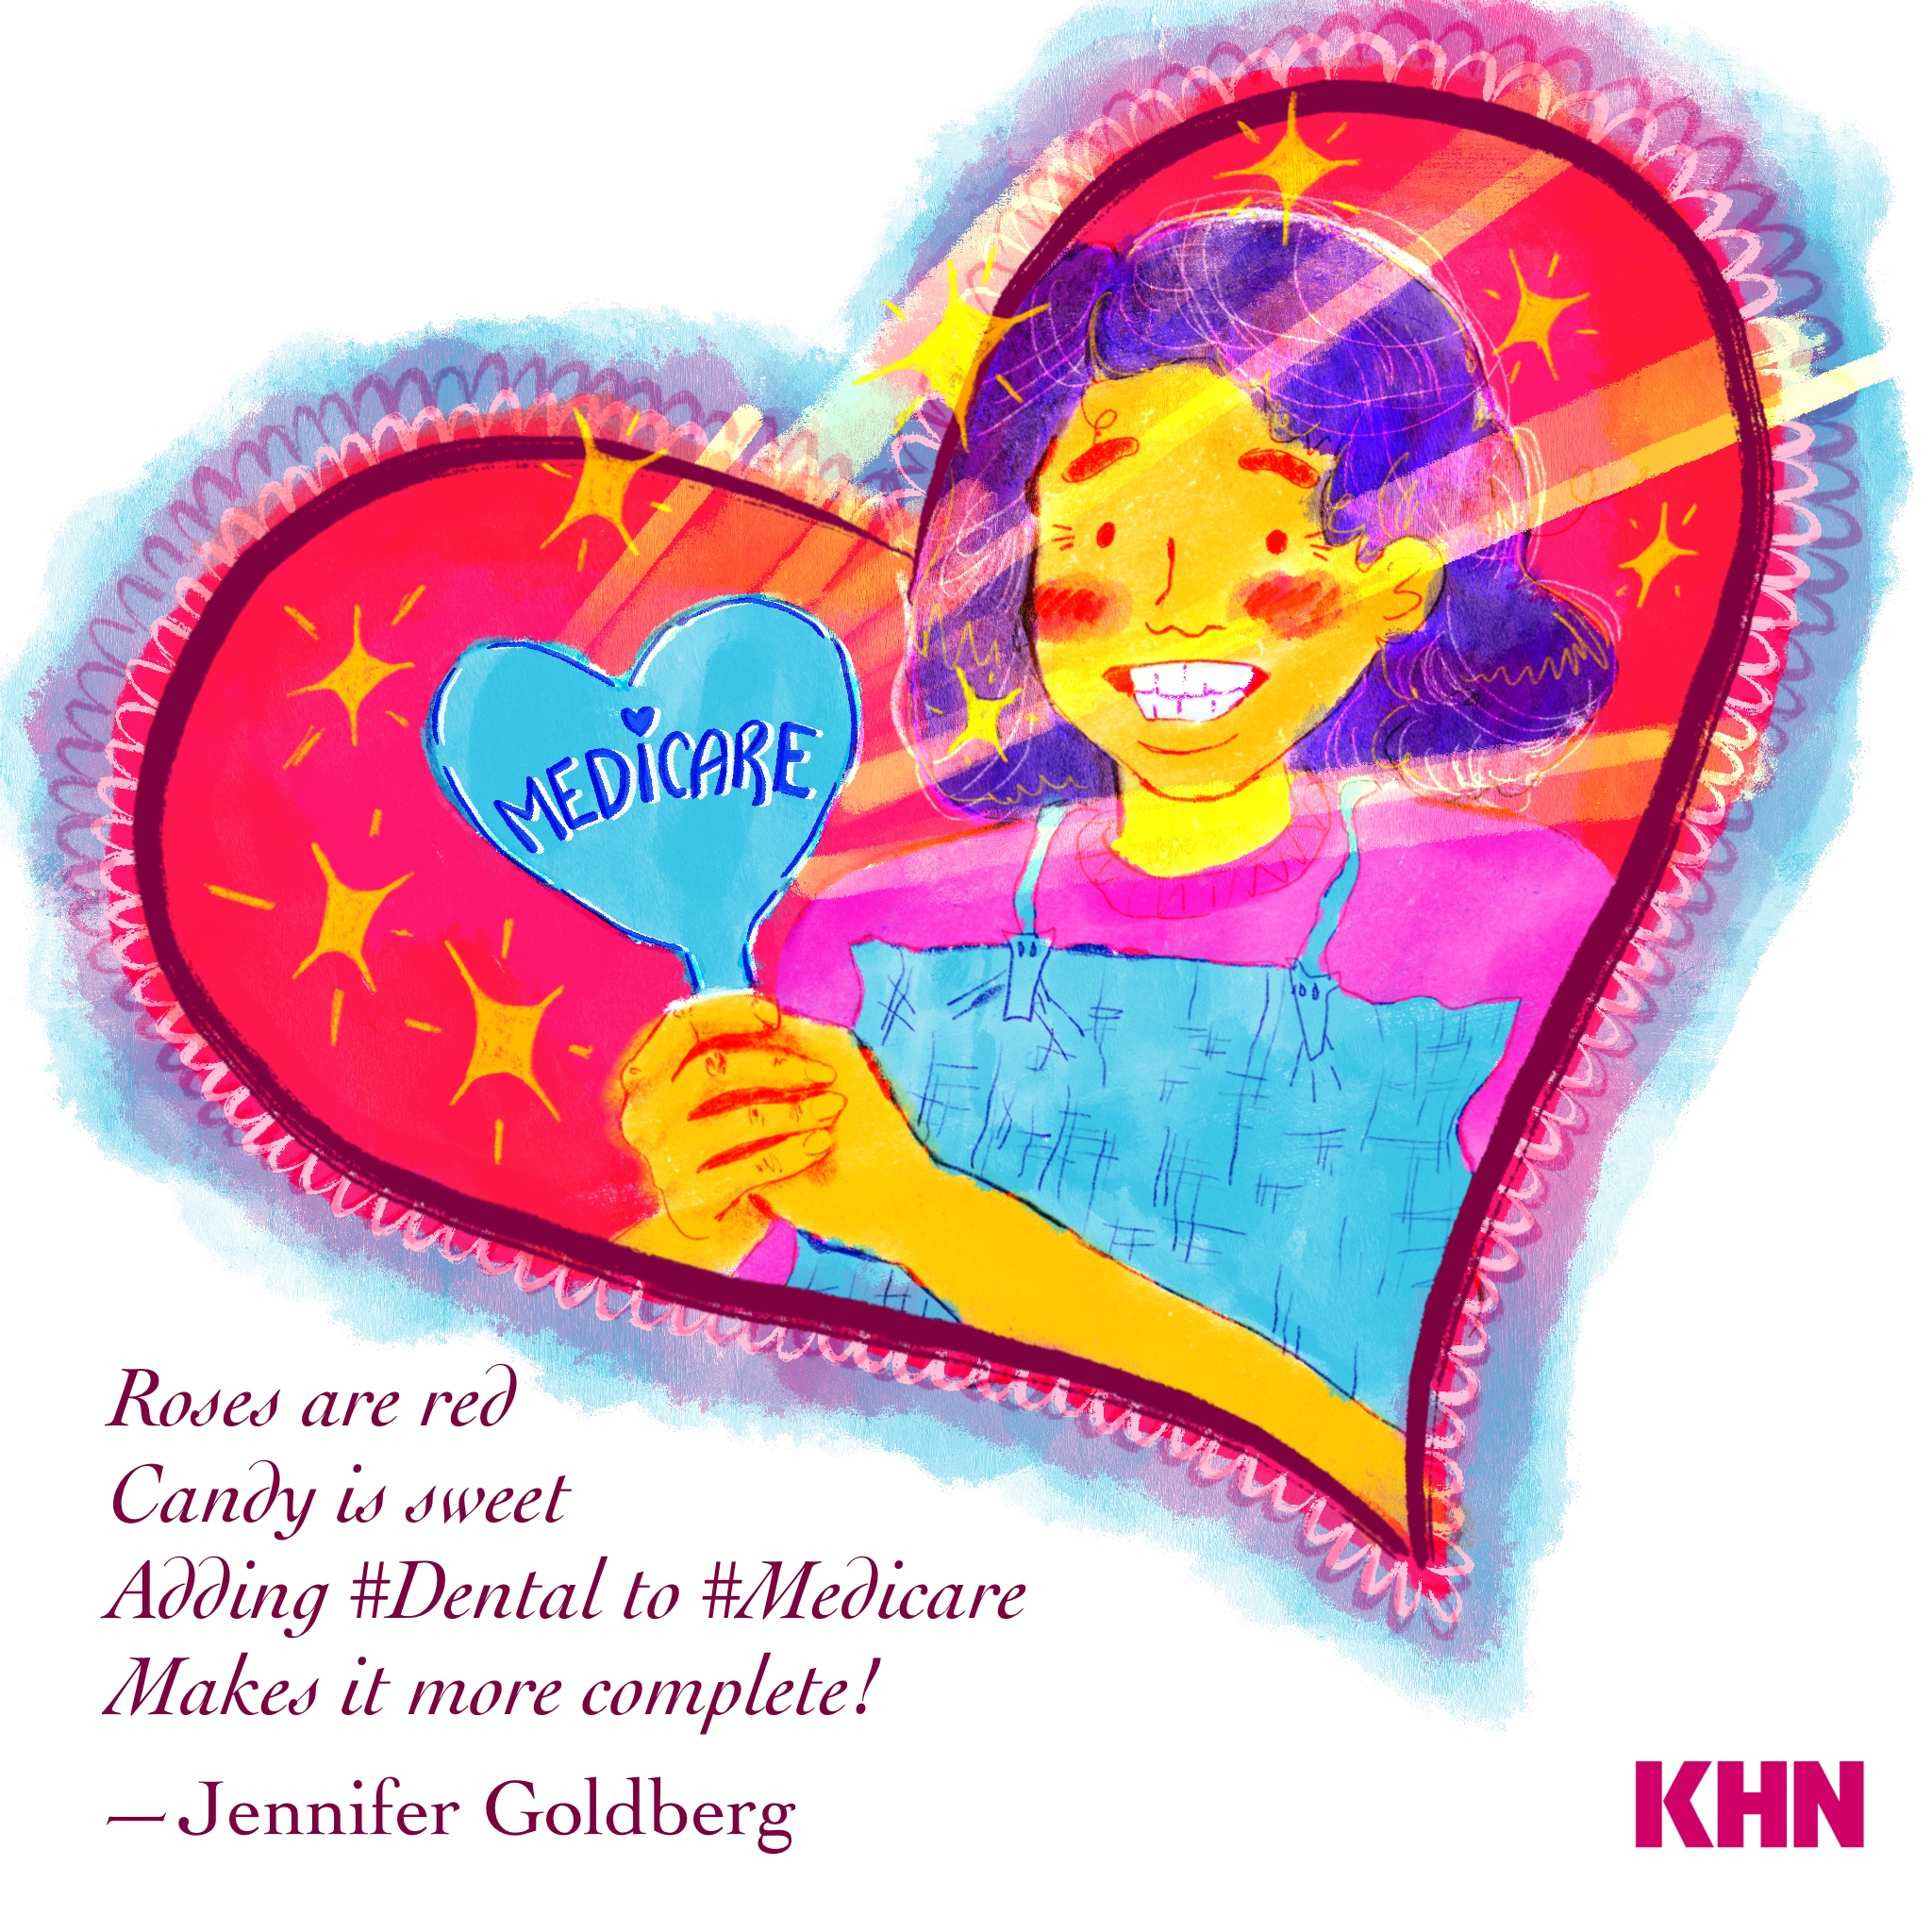 A Valentine's day cartoon showing a woman smiling  broadly while holding a mirror that reads "MEDICARE"